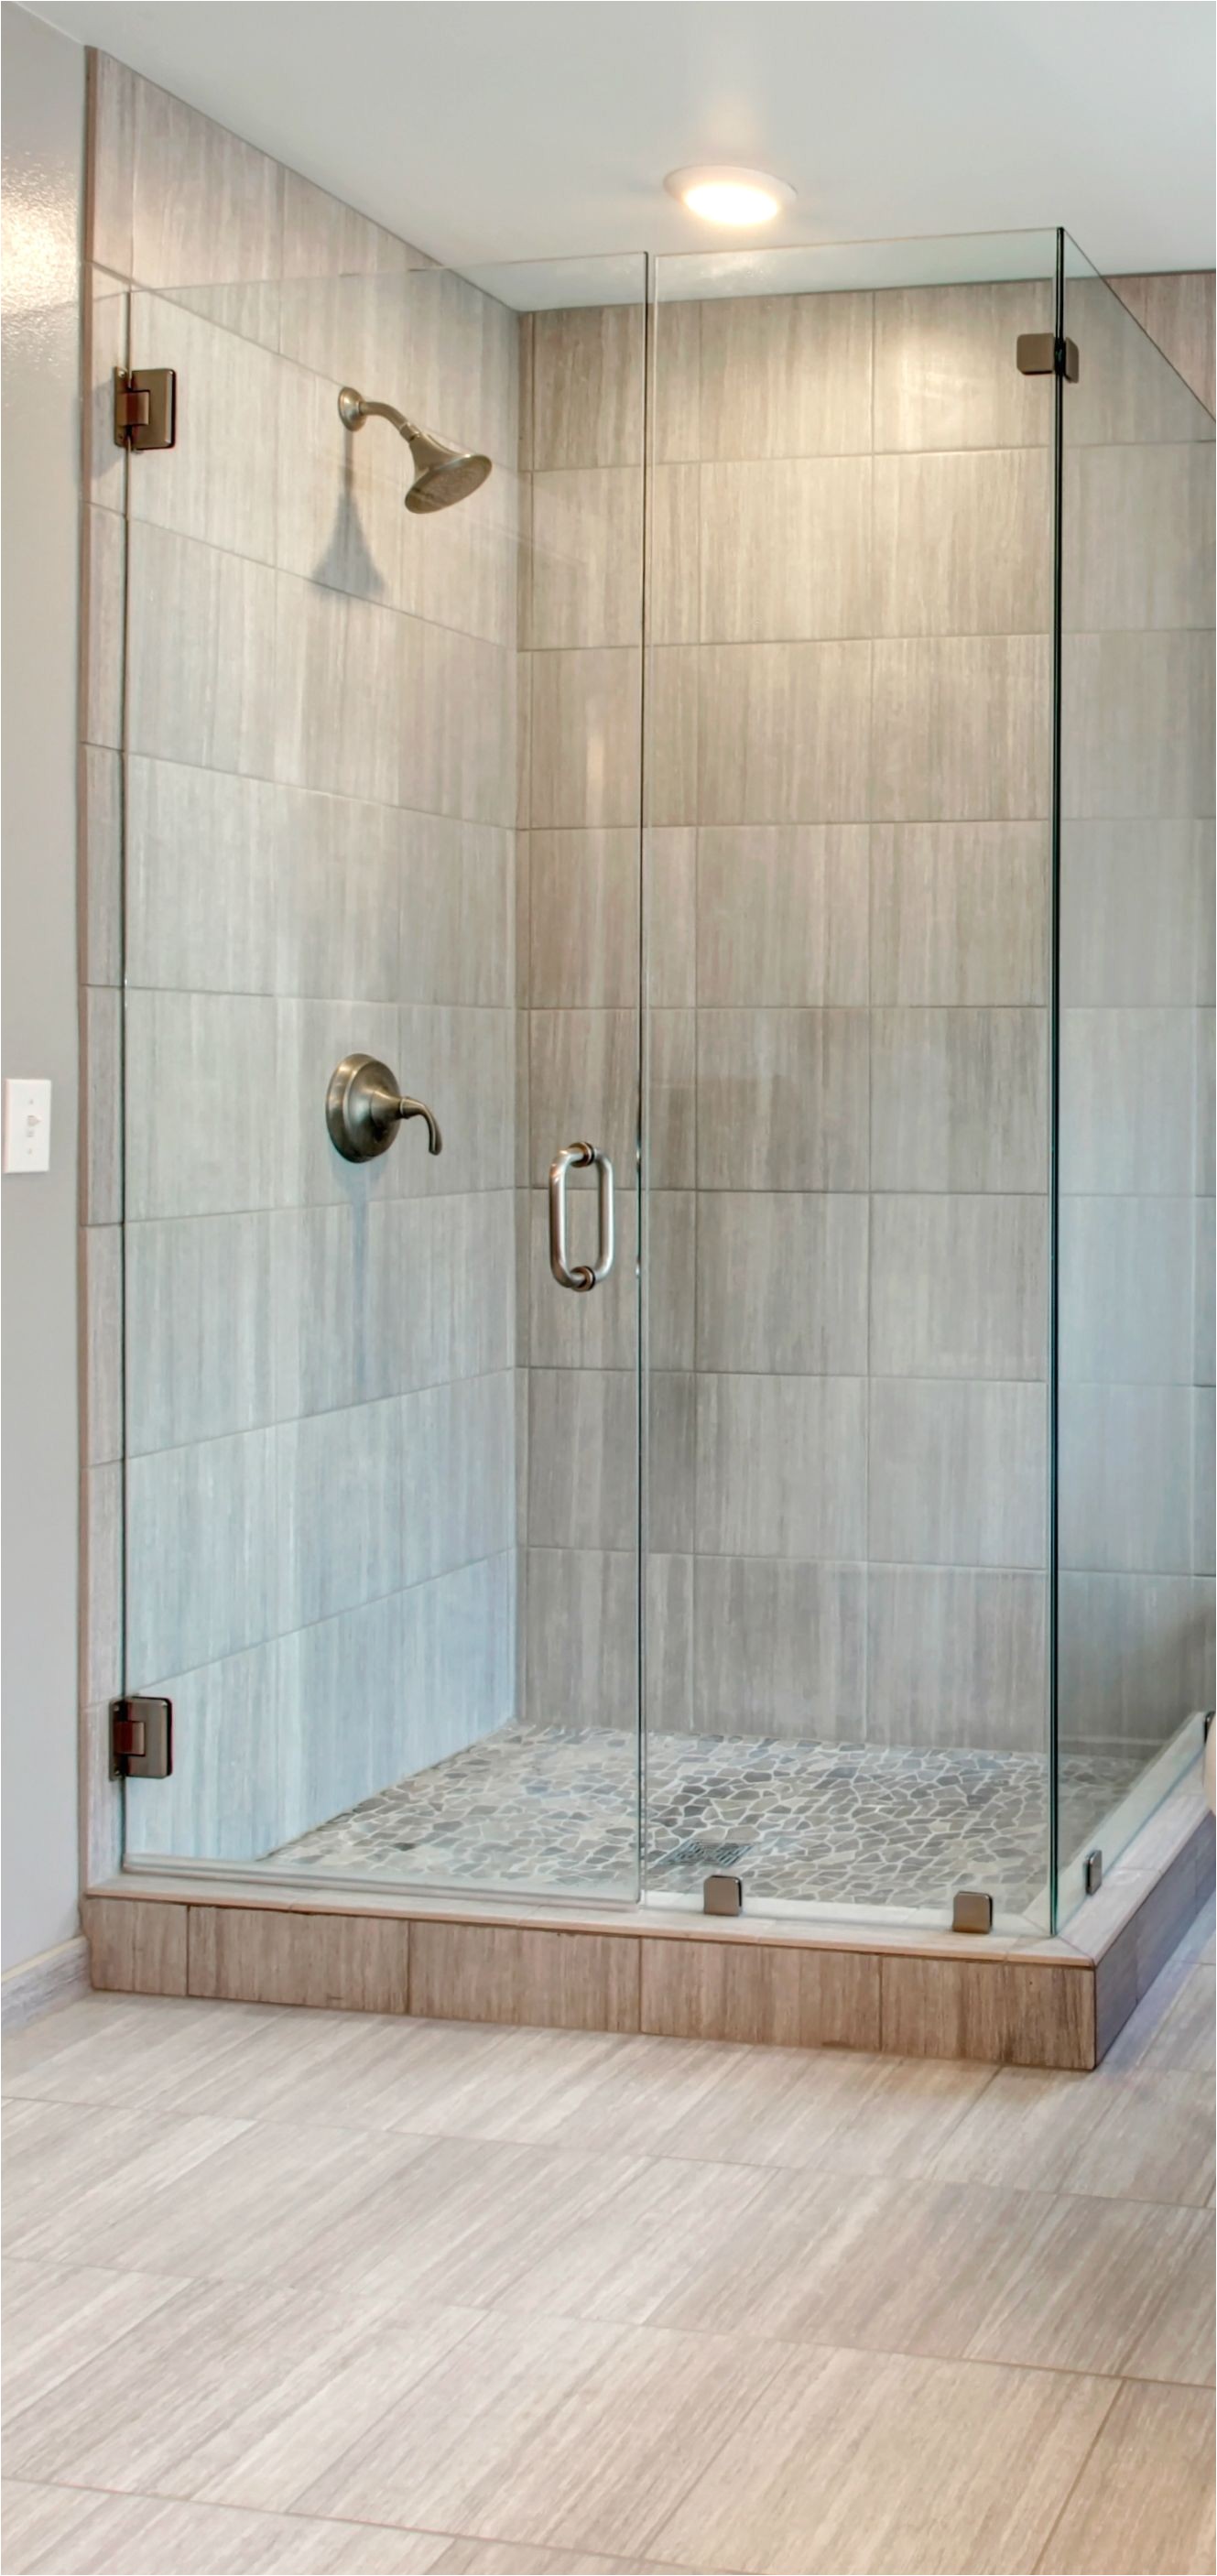 showers corner walk in shower ideas for simple small bathroom with natural stone shower pans decor shower stalls for small bathrooms ideas with corner style